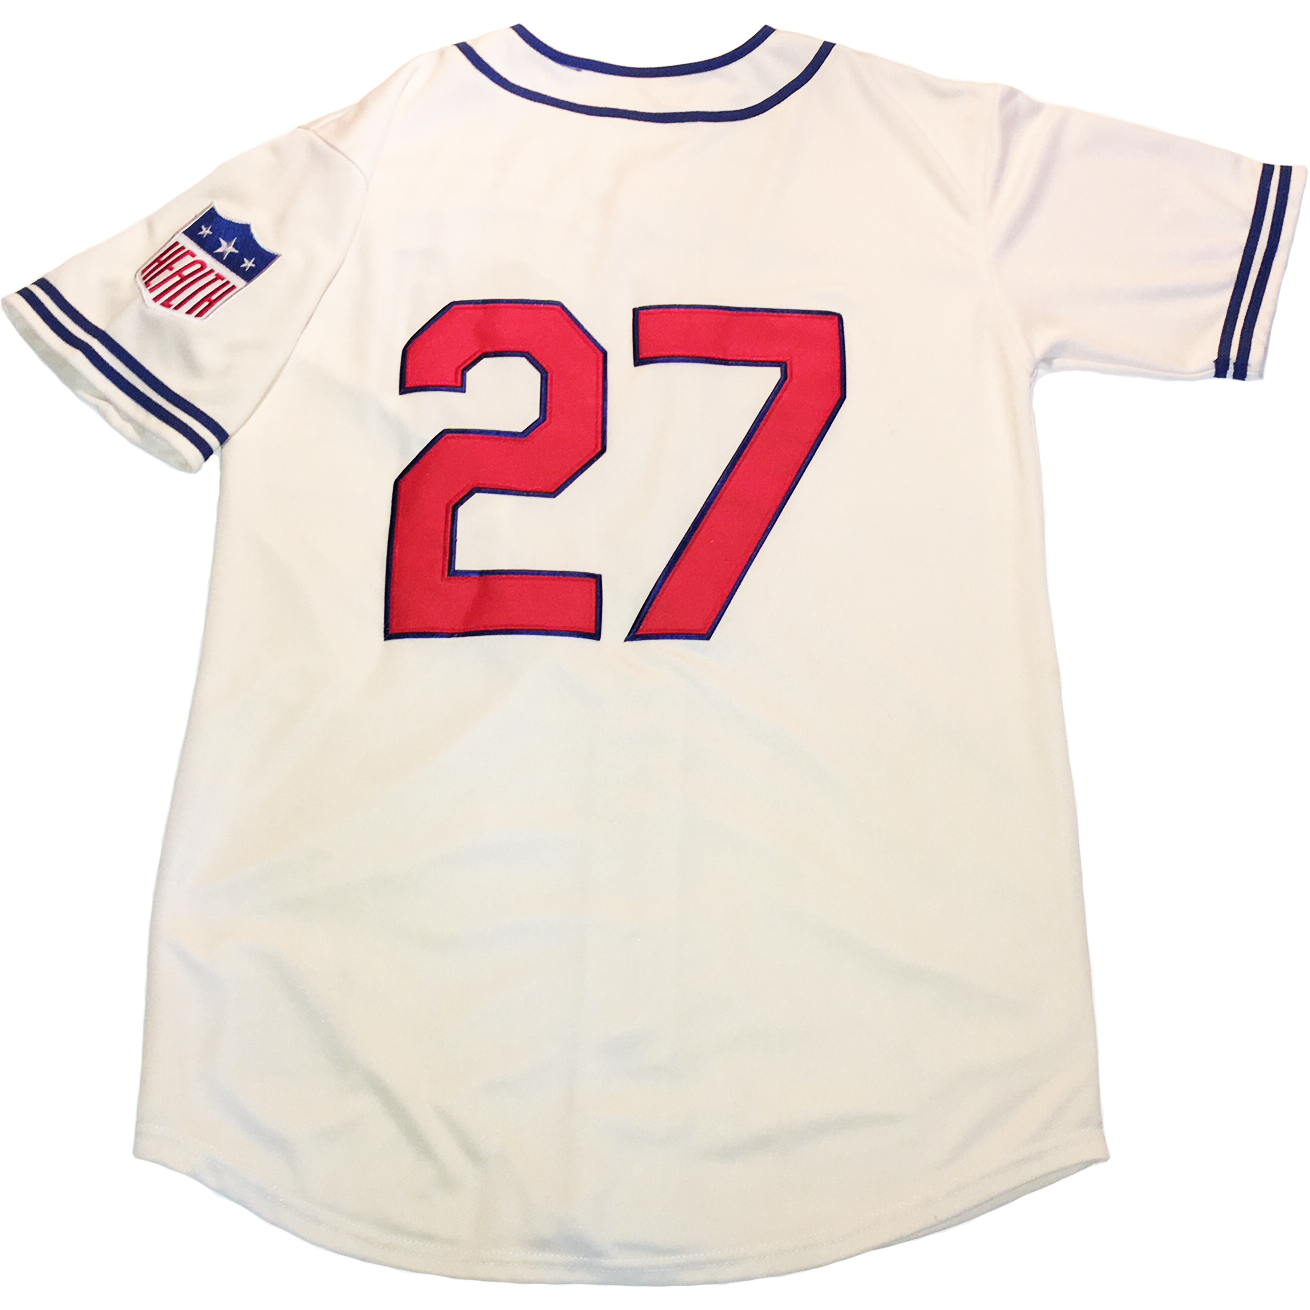 PCL Angels Jersey